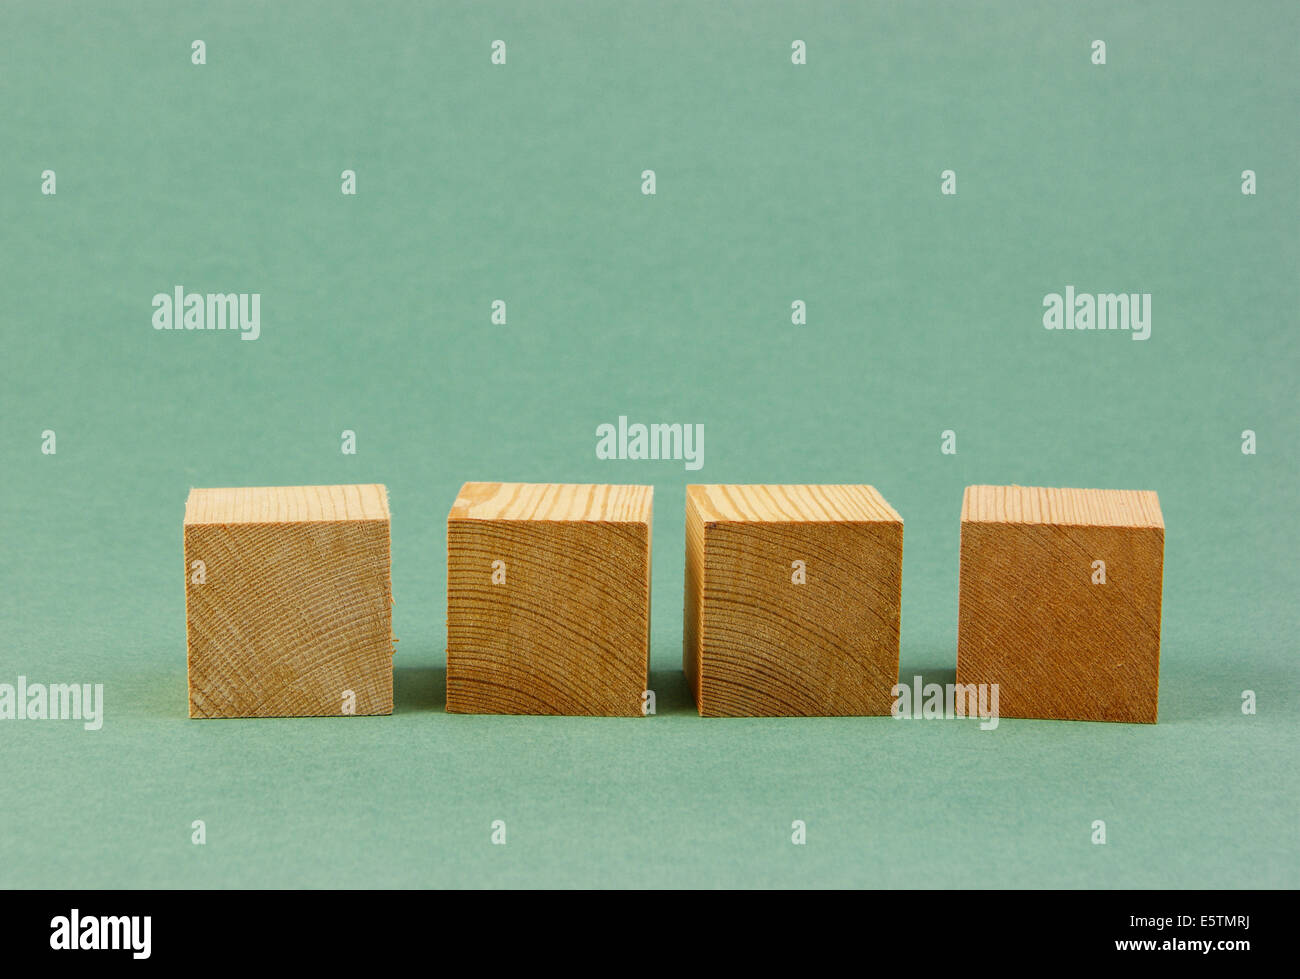 wooden geometric cube on a green background Stock Photo